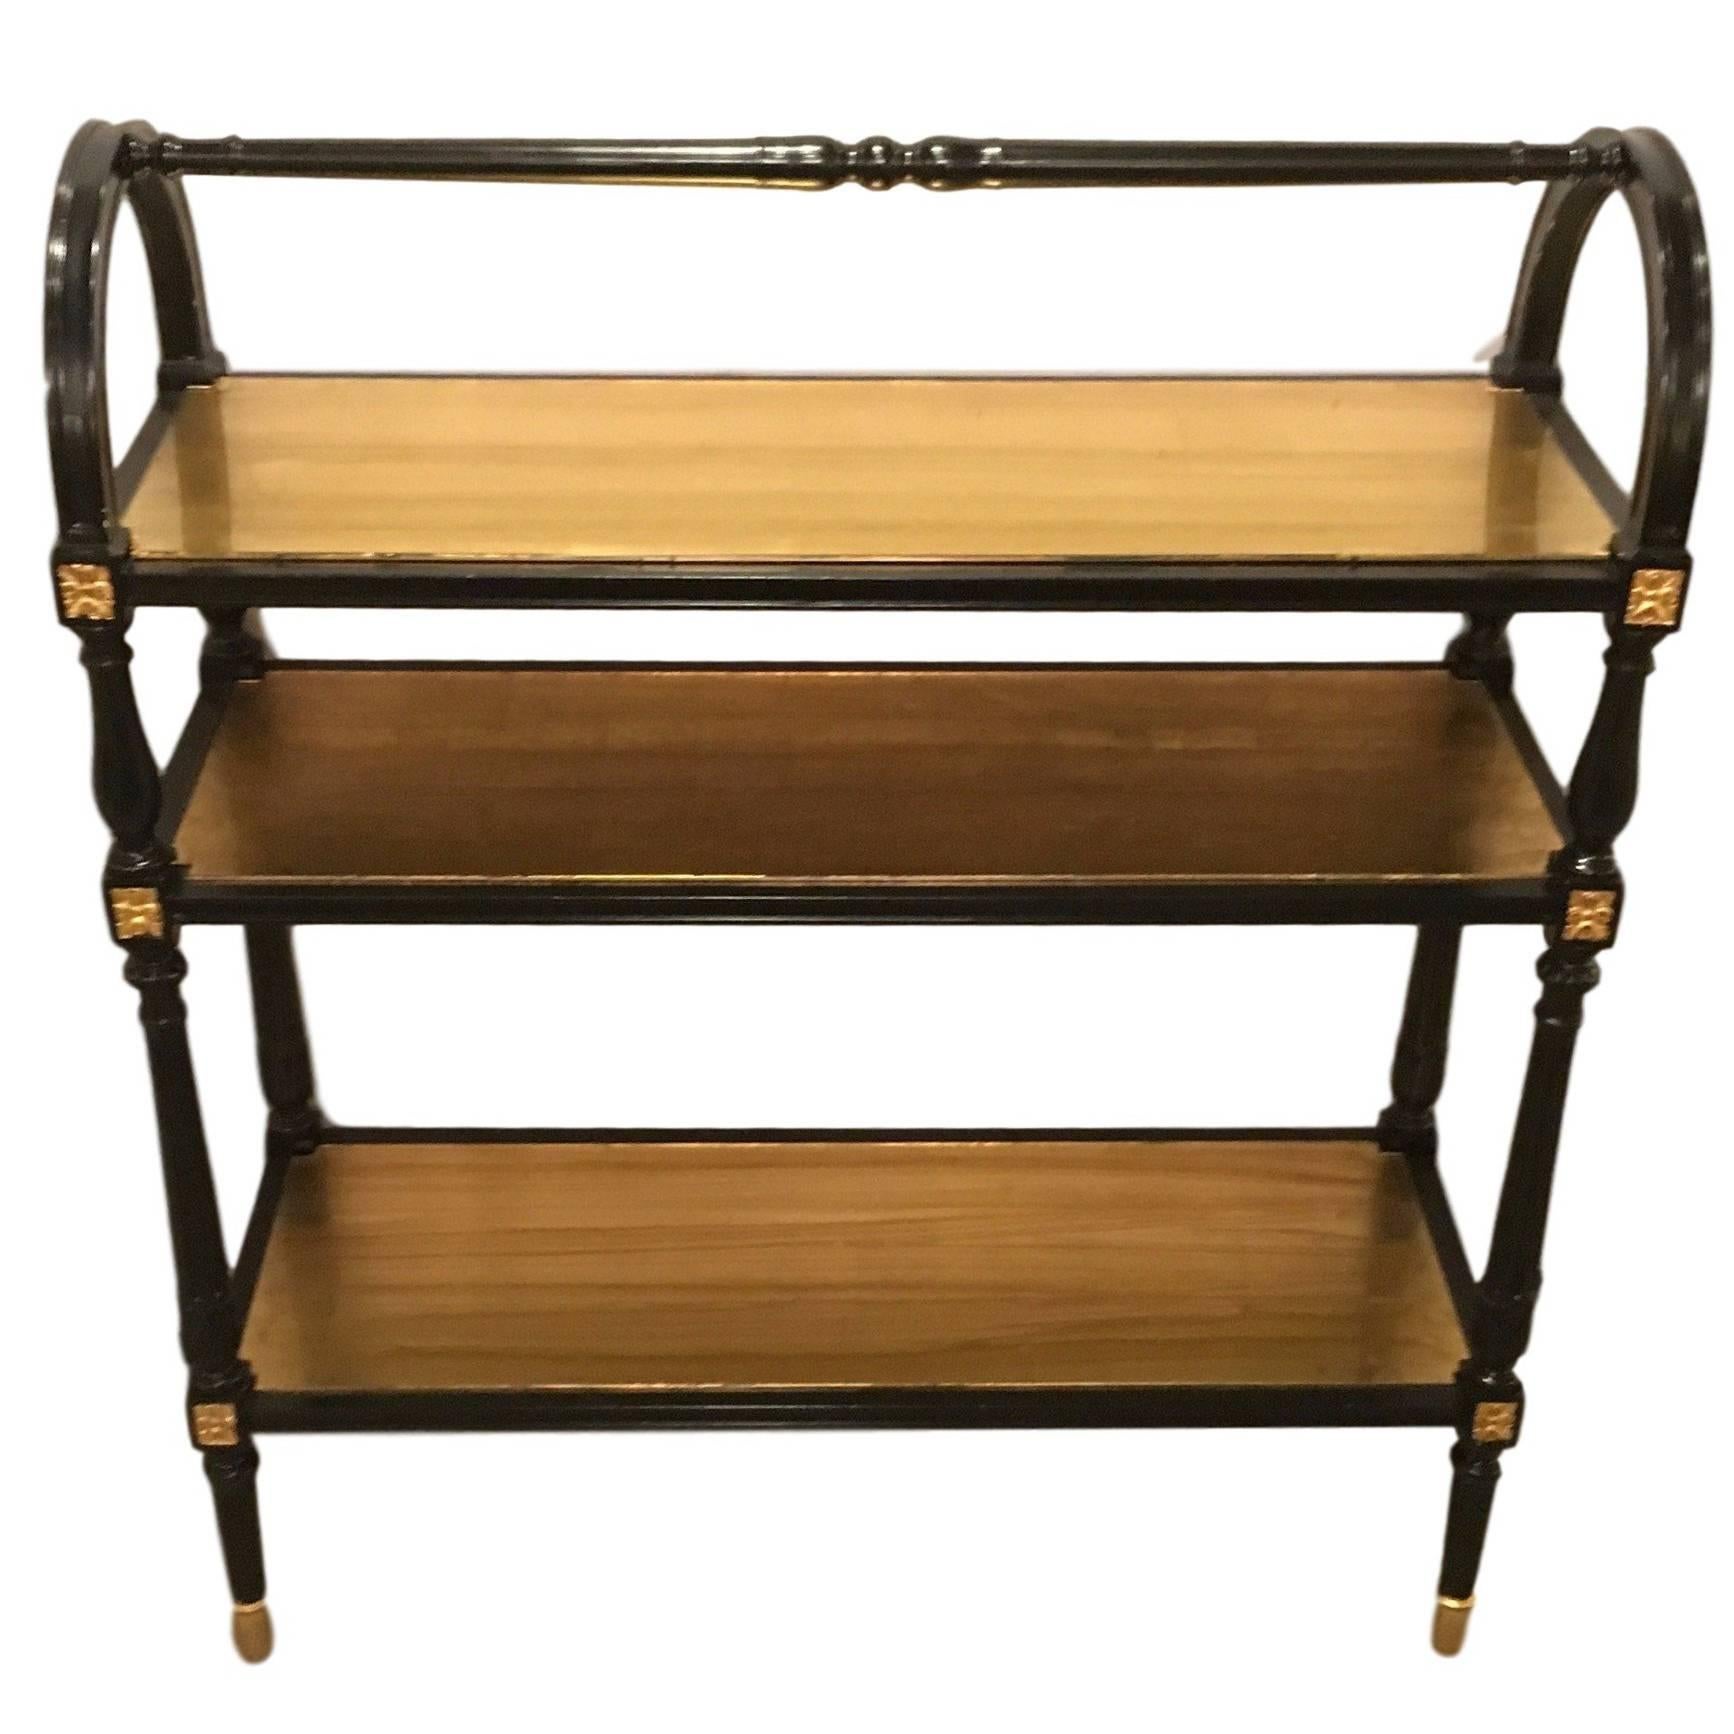 Neoclassical Hollywood Regency Style Etagere or Server